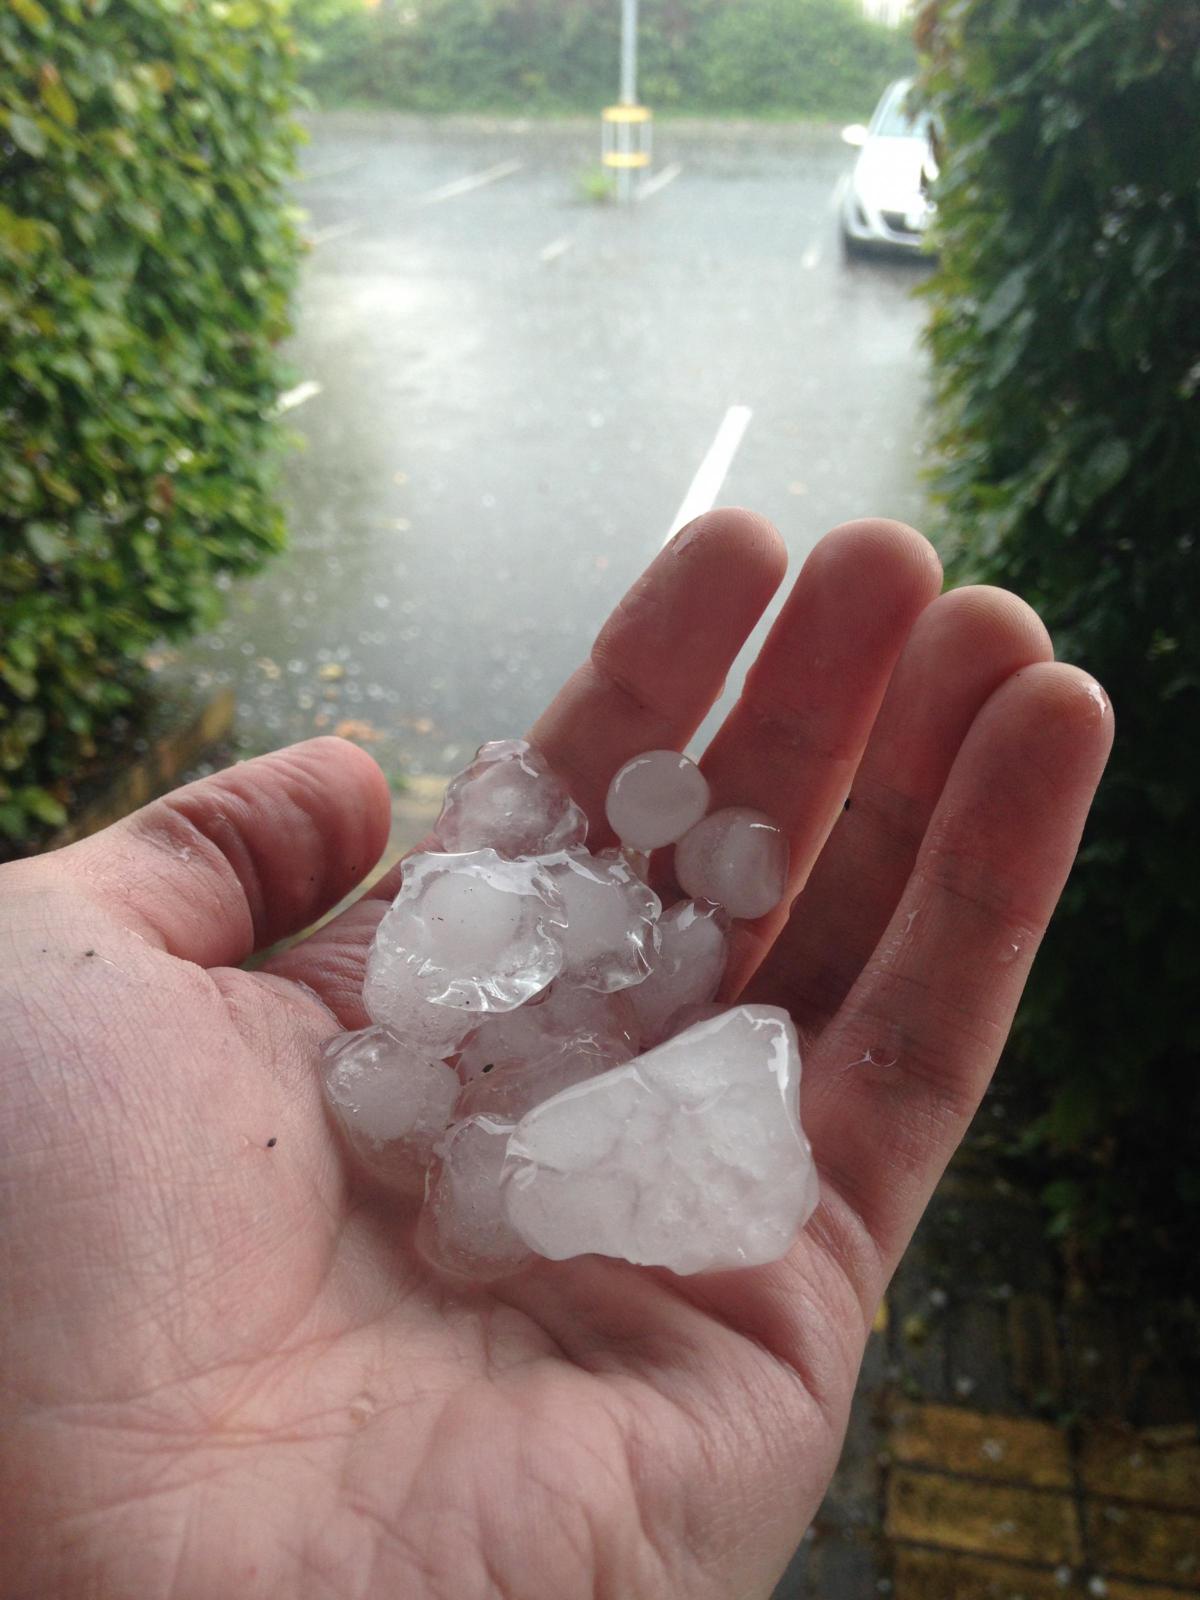 Some of the hailstones that pelted down outside the Oxford Mail offices